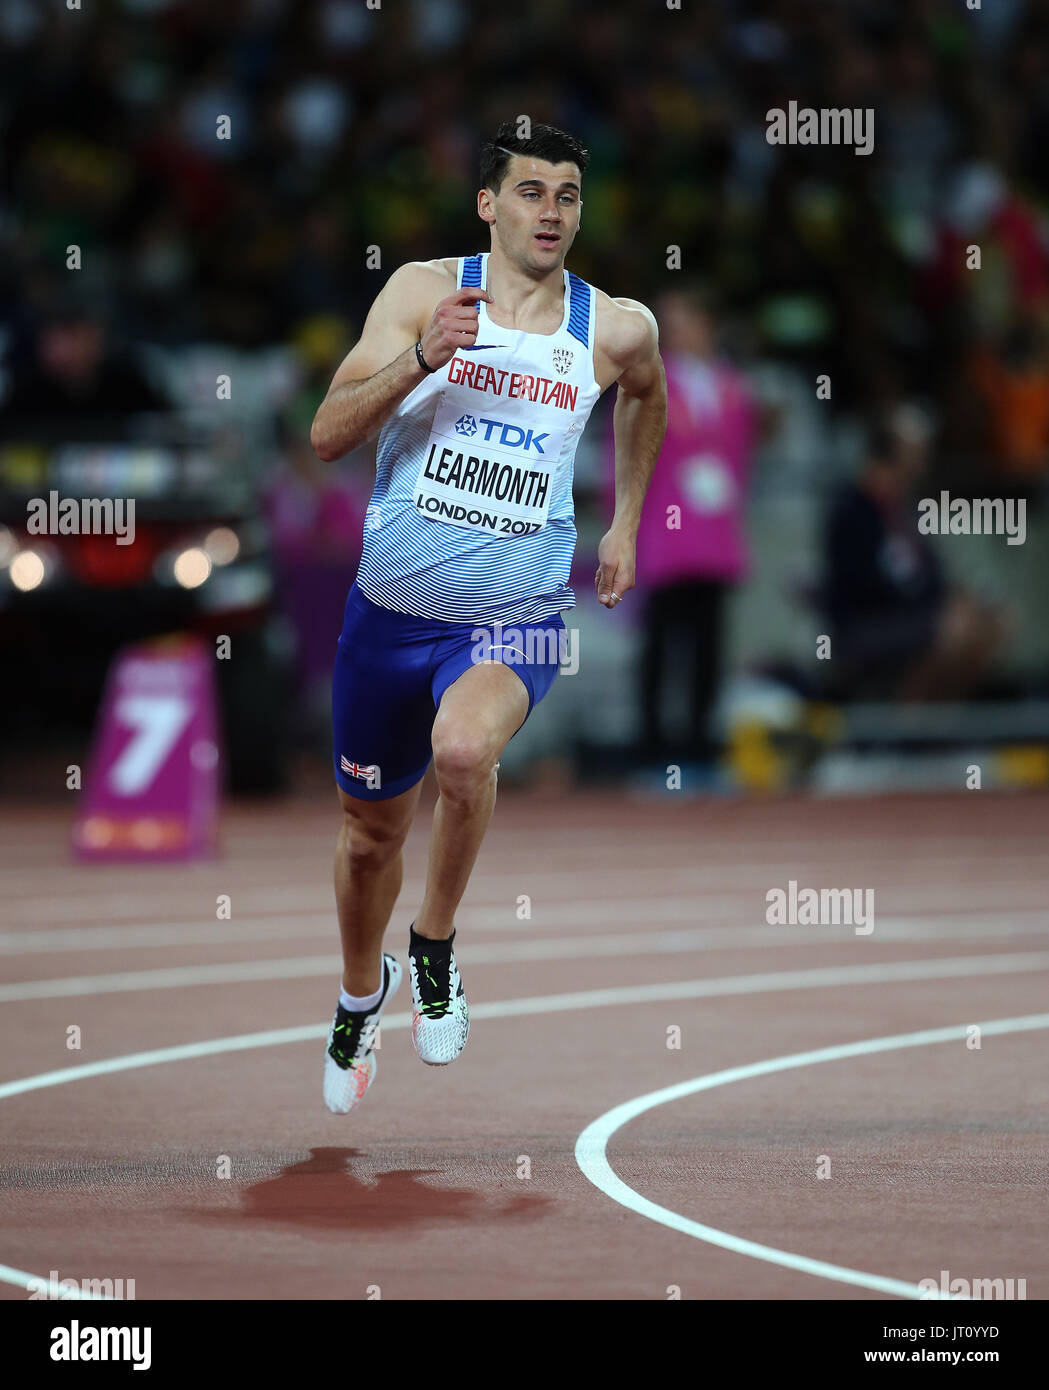 Guy Learmonth 800 Metres World Athletics Championships 2017 London Stam, London, England 06 August 2017 Credit: Allstar Picture Library/Alamy Live News Stock Photo